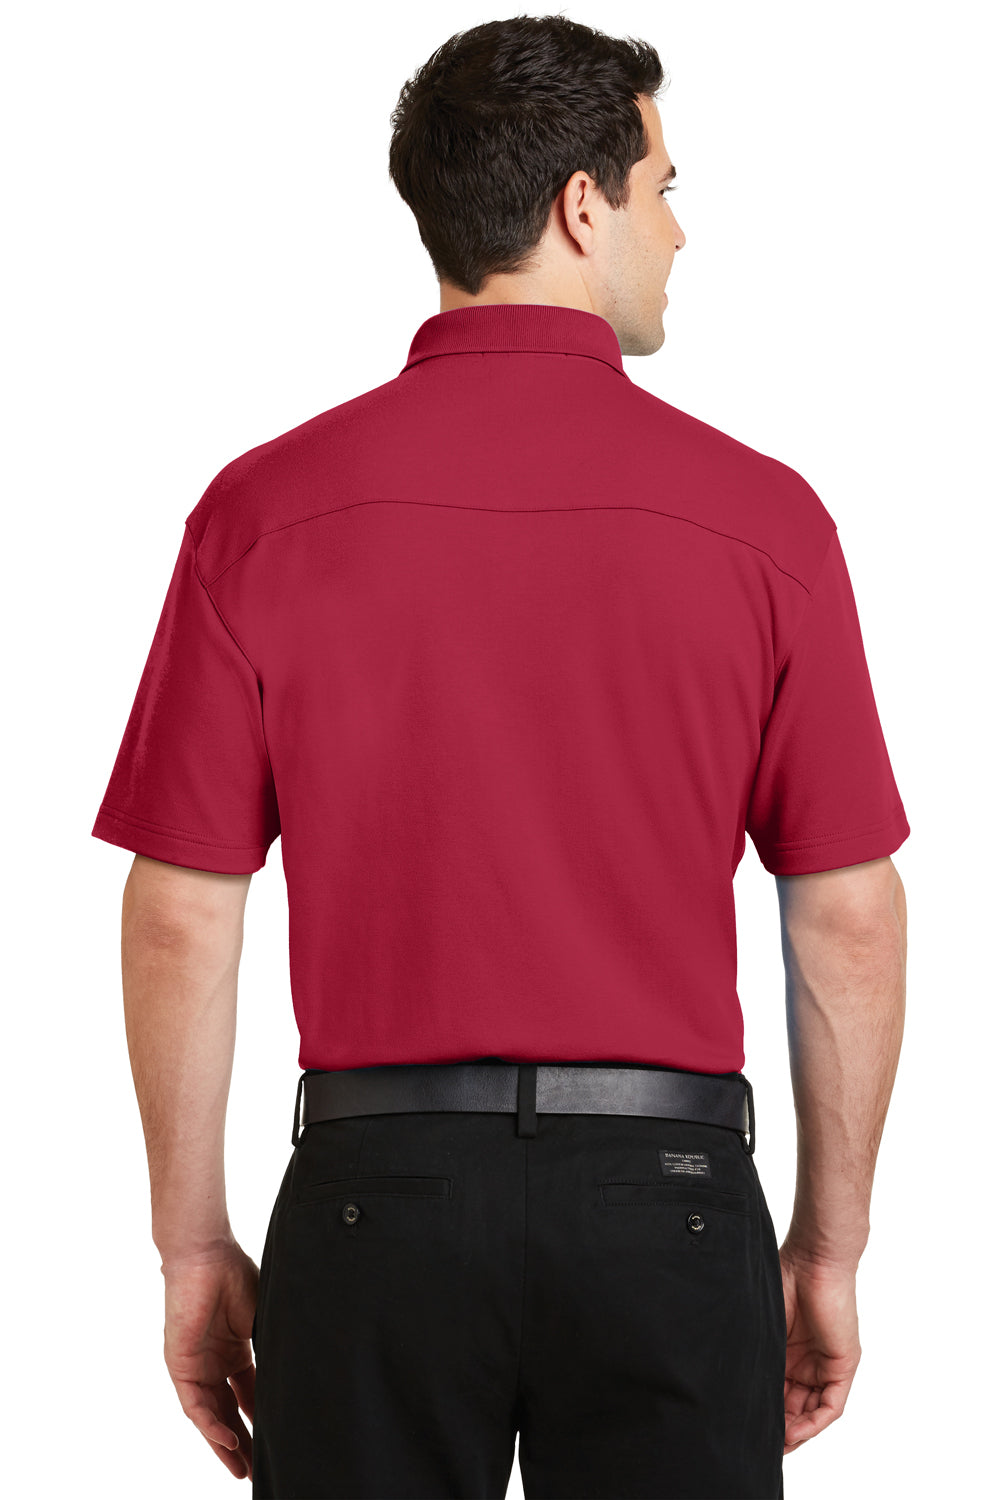 Port Authority K5200 Mens Silk Touch Performance Moisture Wicking Short Sleeve Polo Shirt Red Back